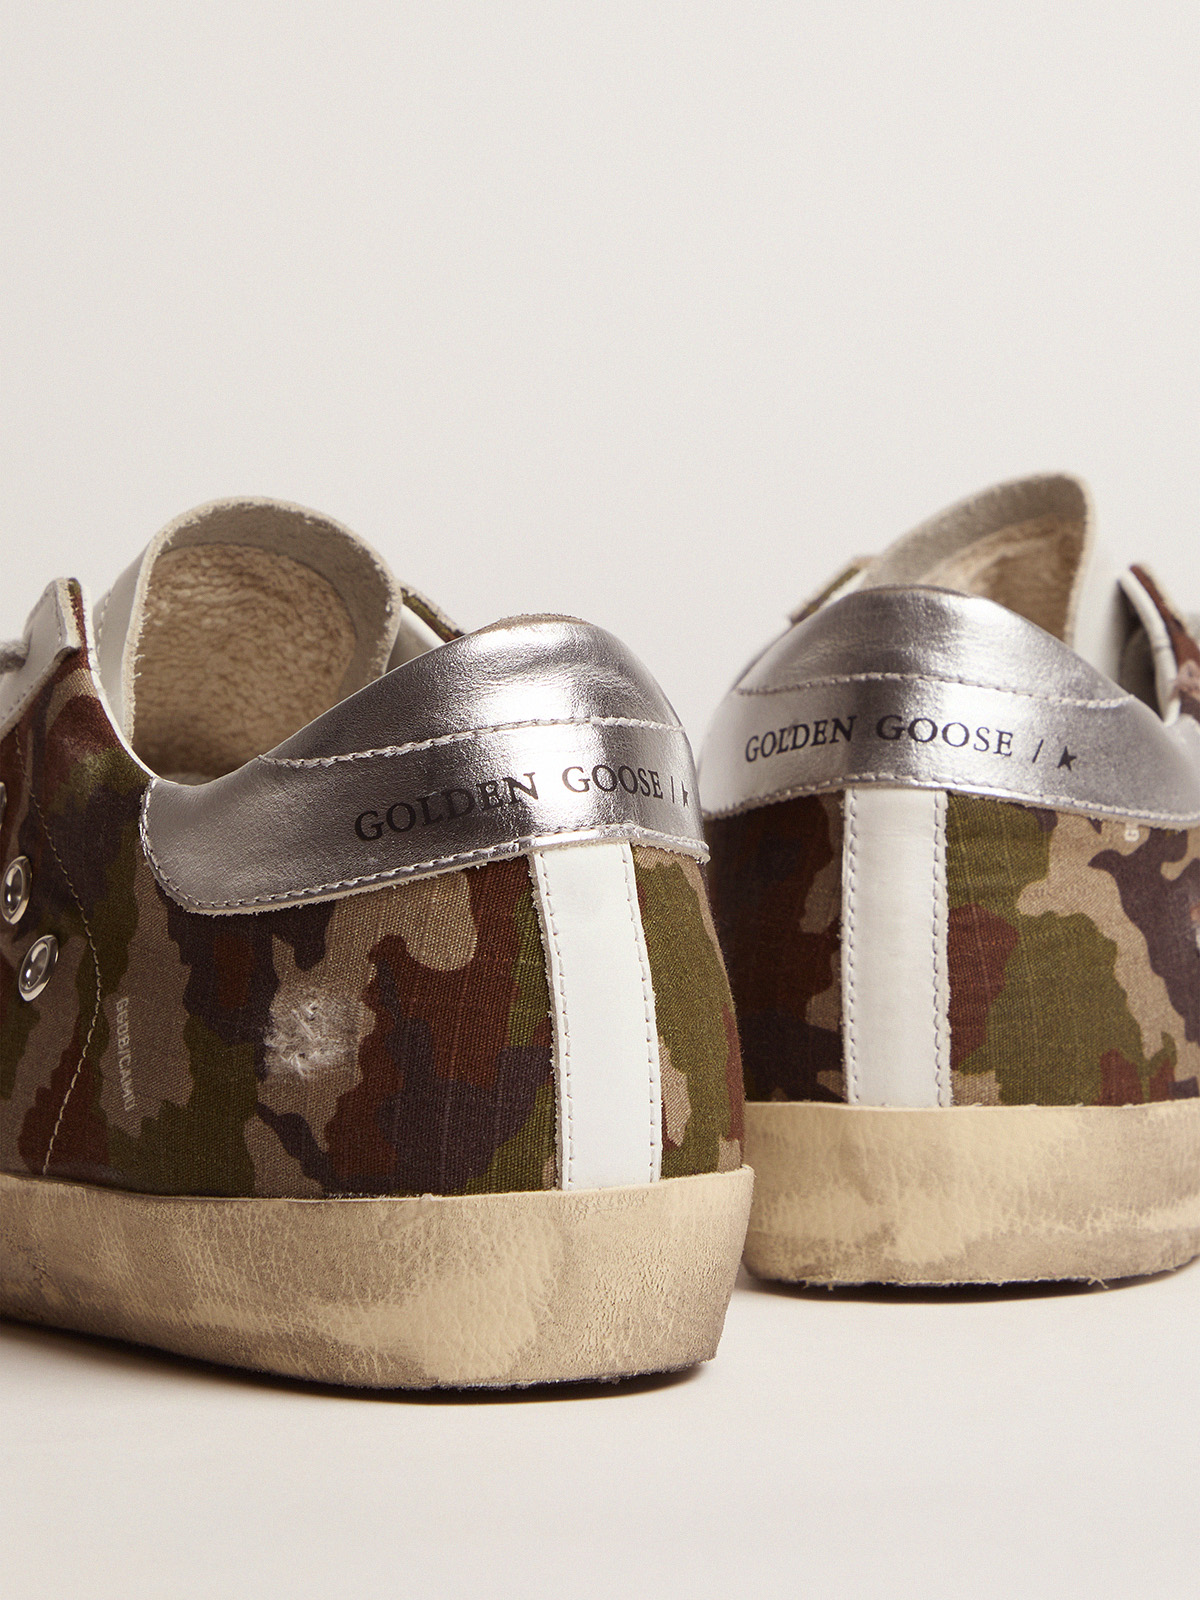 Super-Star sneakers with camouflage pattern and fuchsia star | Golden Goose